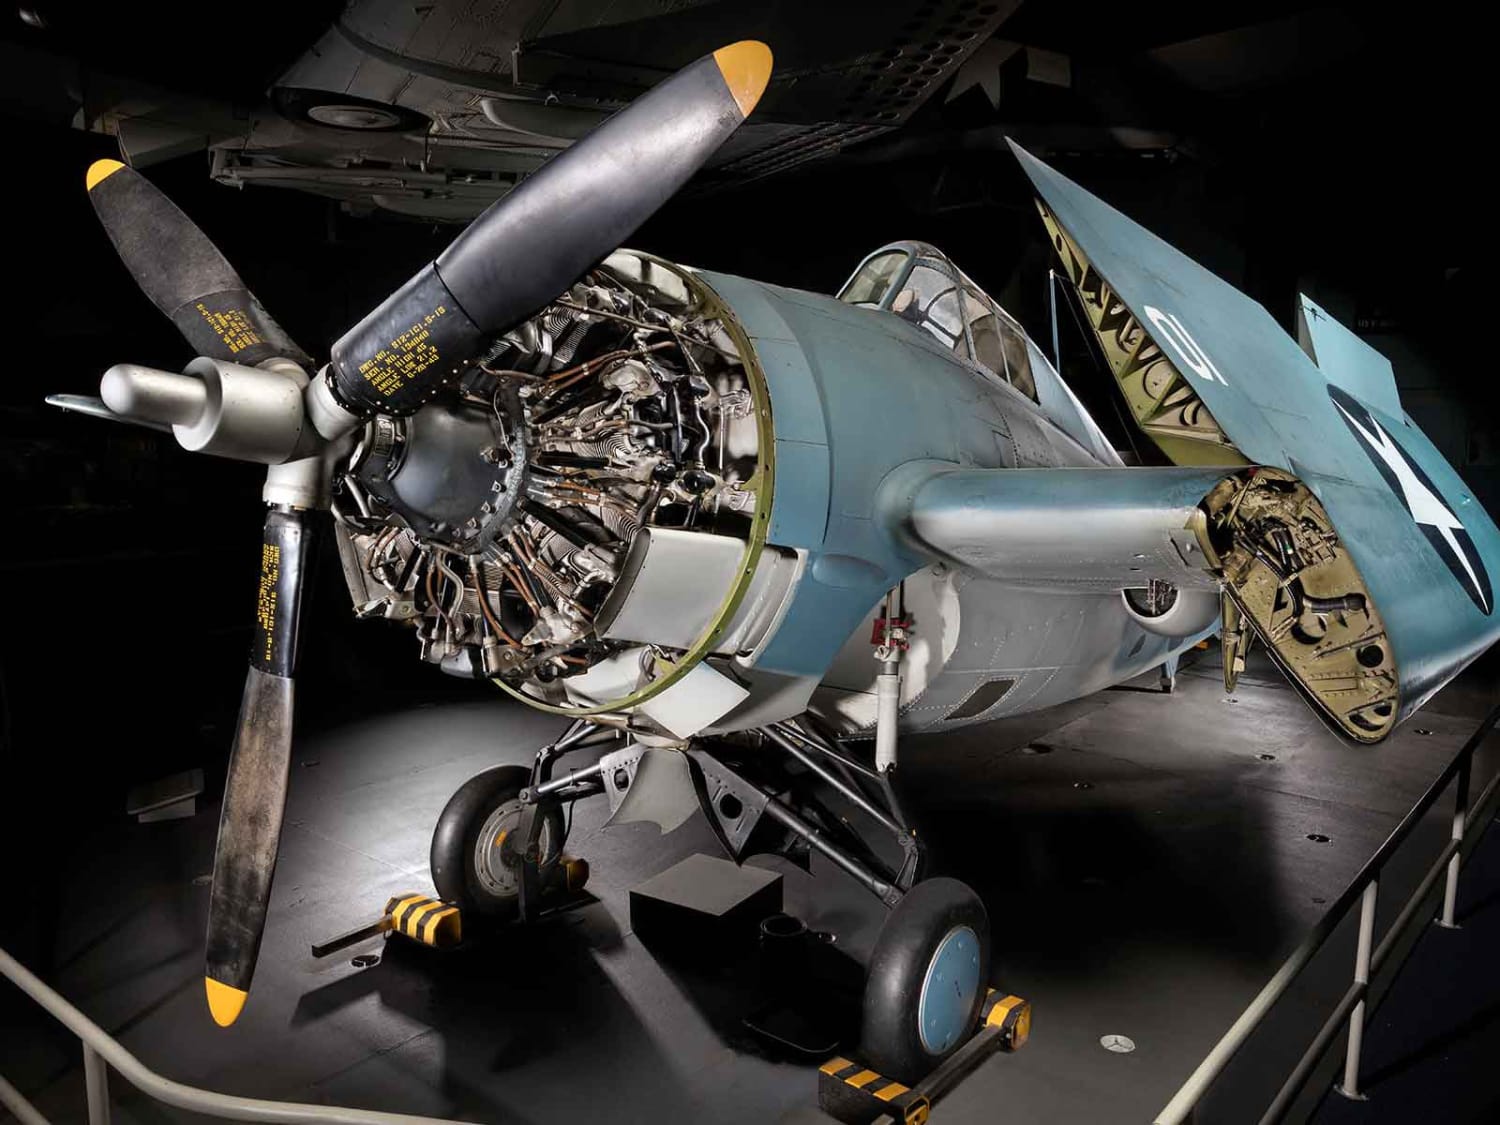 How the Rugged F4F Wildcat Held the Line During World War II